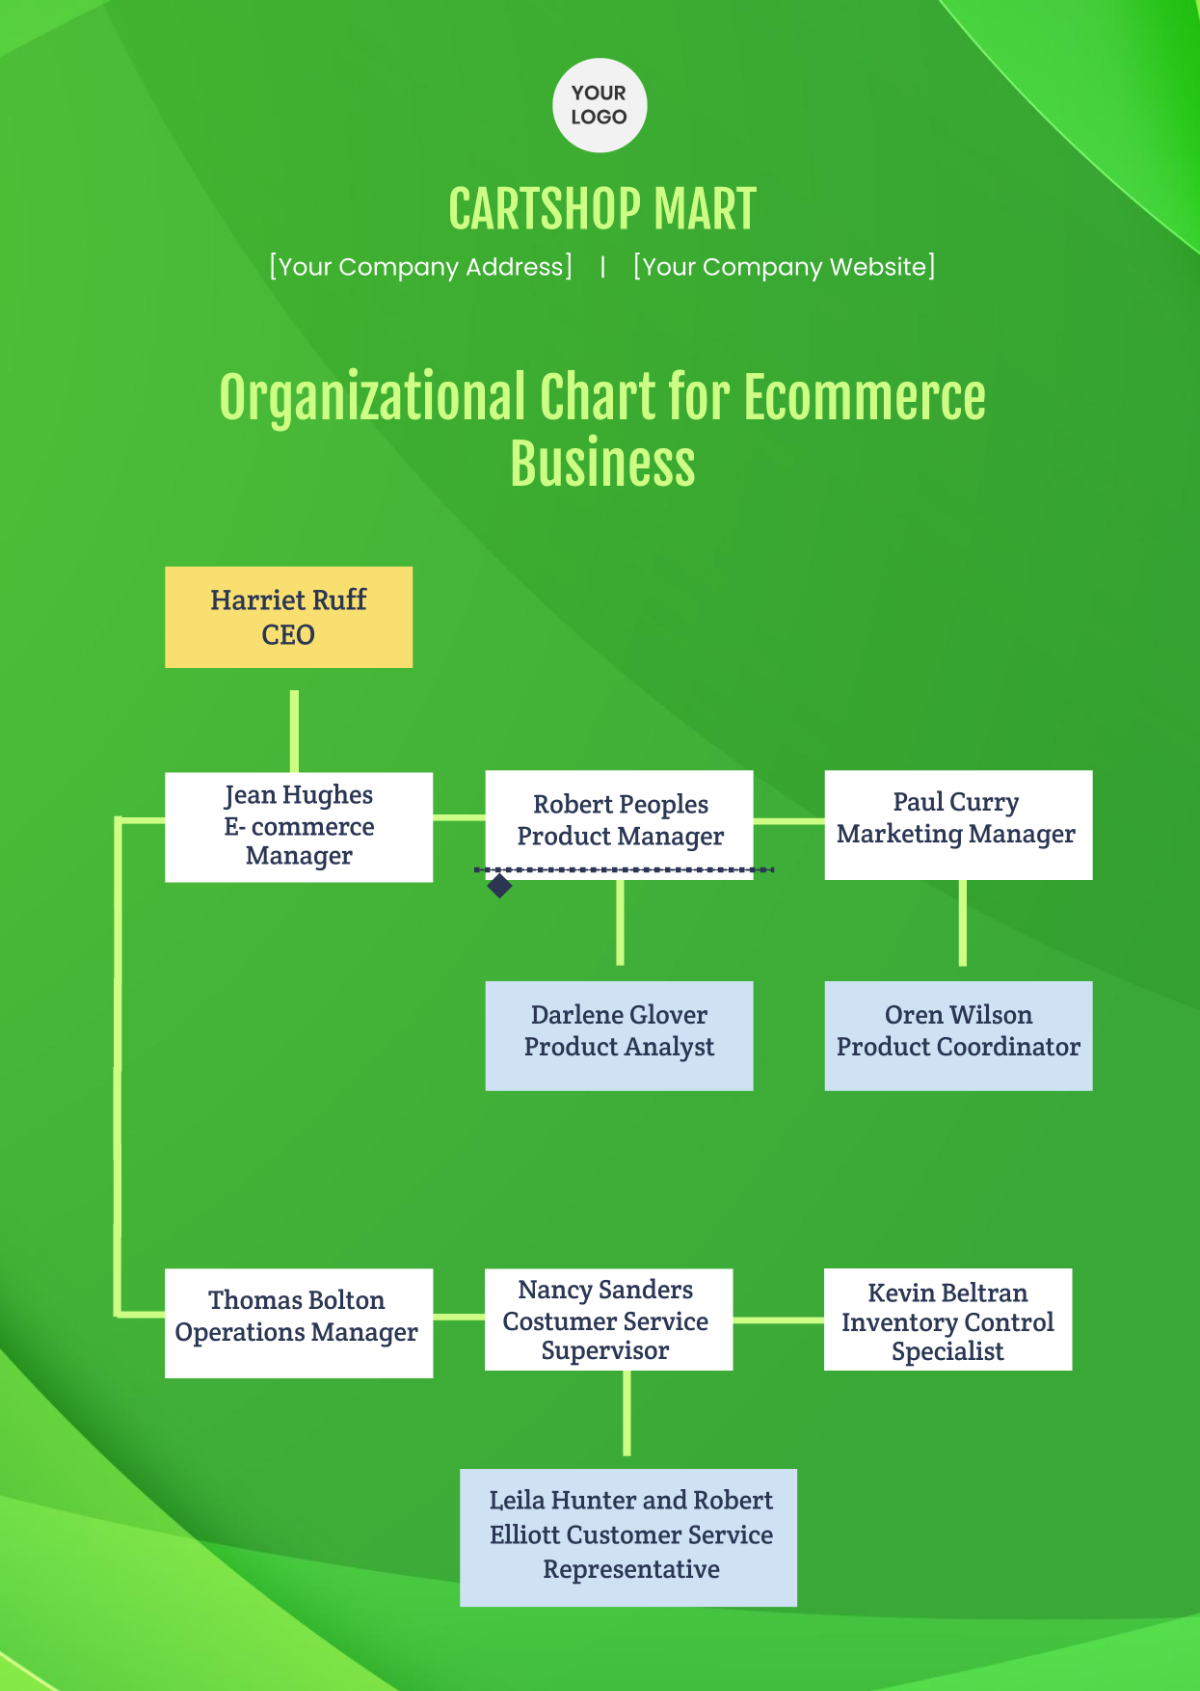 Organizational Chart for Ecommerce Business Template